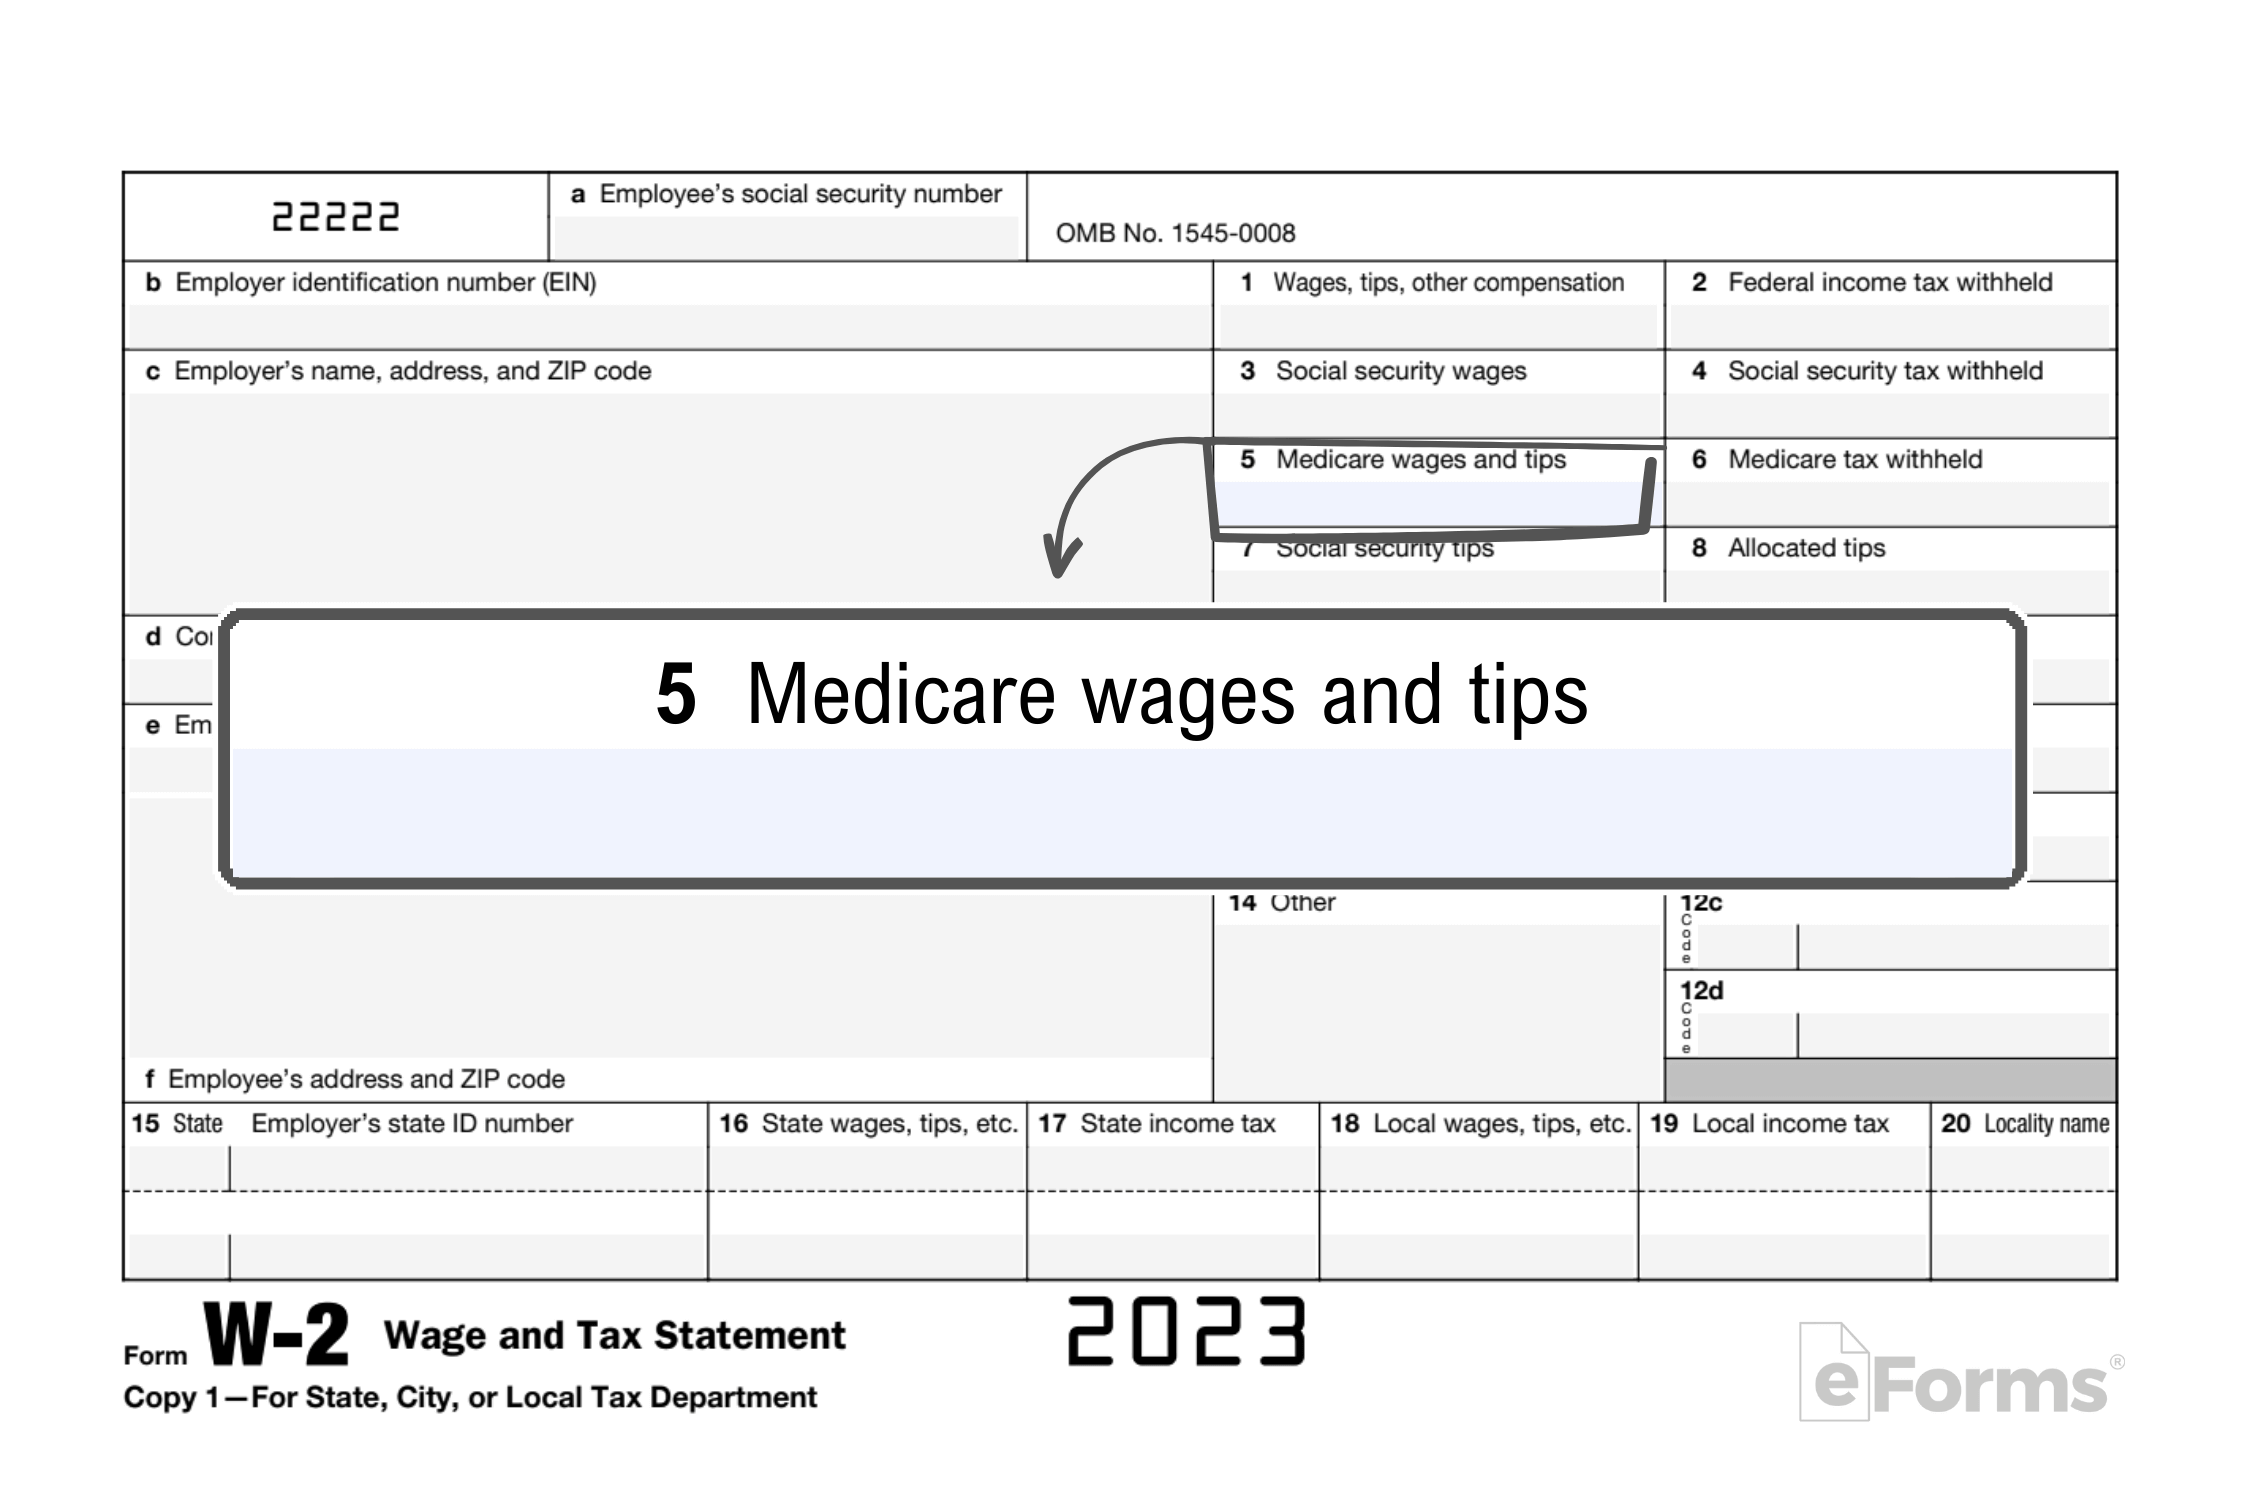 Medicare wages and tips